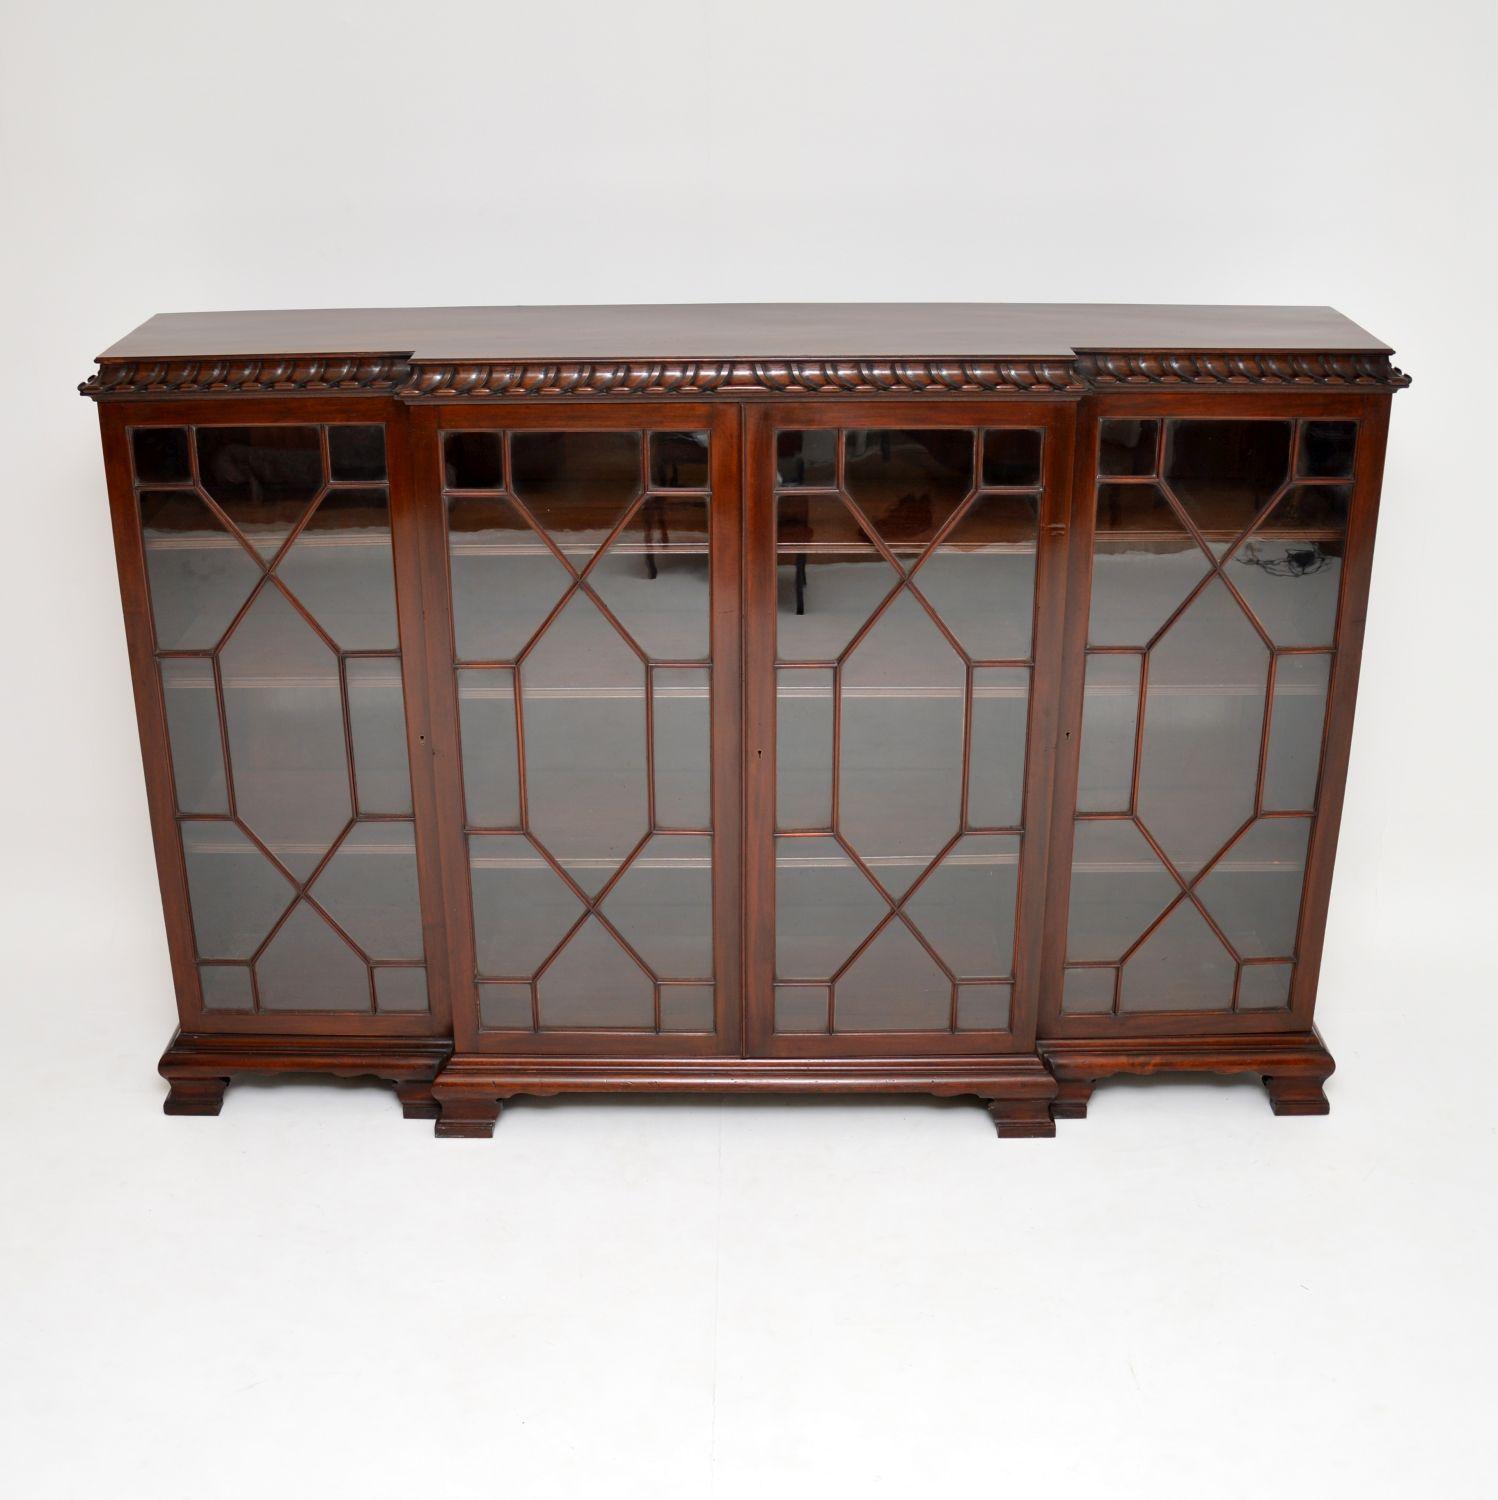 Very strong looking and practicable solid mahogany antique breakfront dwarf bookcase in the Chippendale style, dating from circa 1920s period and in excellent condition.

It has a spectacularly scalloped out and carved top edge, which is very